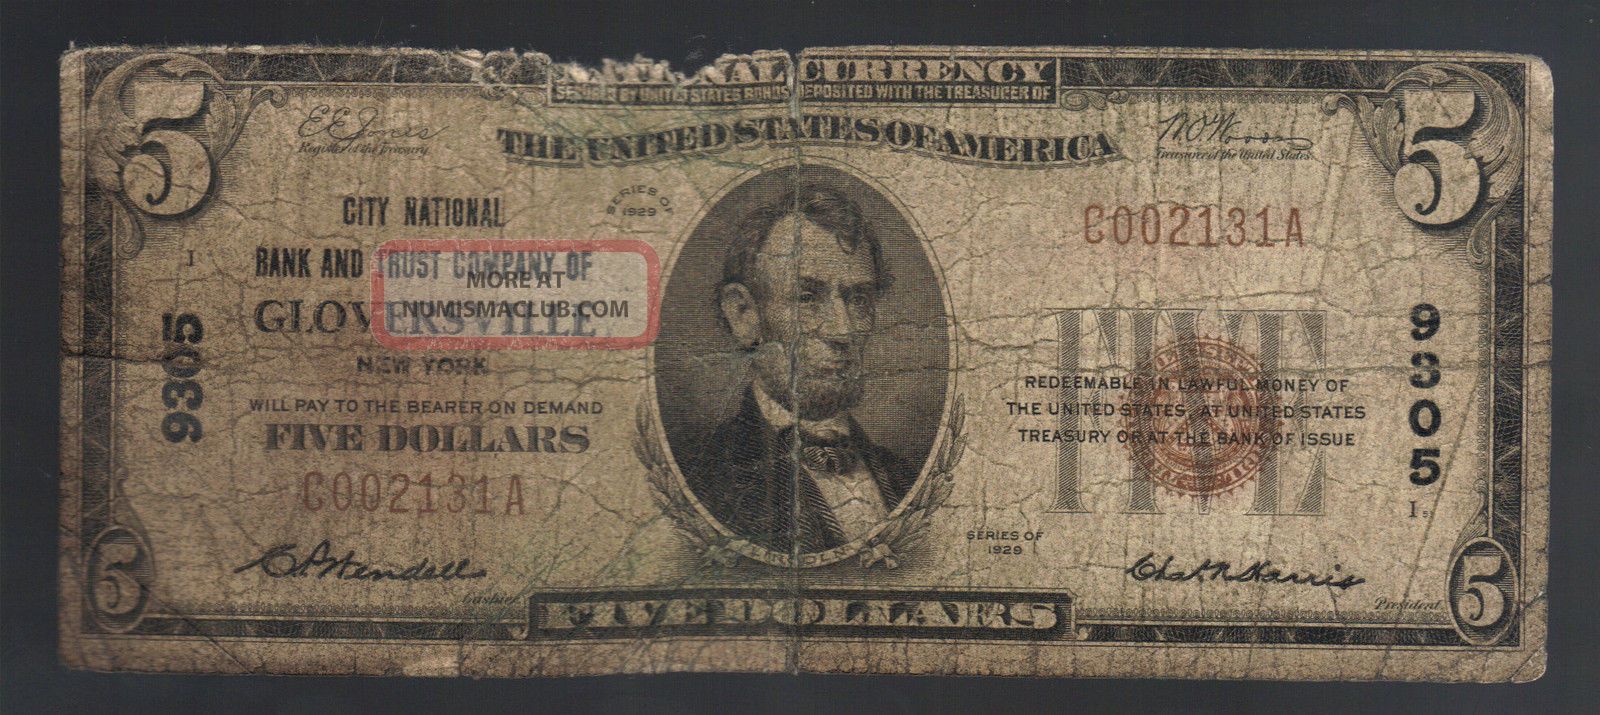 $5 1929 Gloversville National York Bank Note Old Ny Paper Money Us Bill Worn Small Size Notes photo